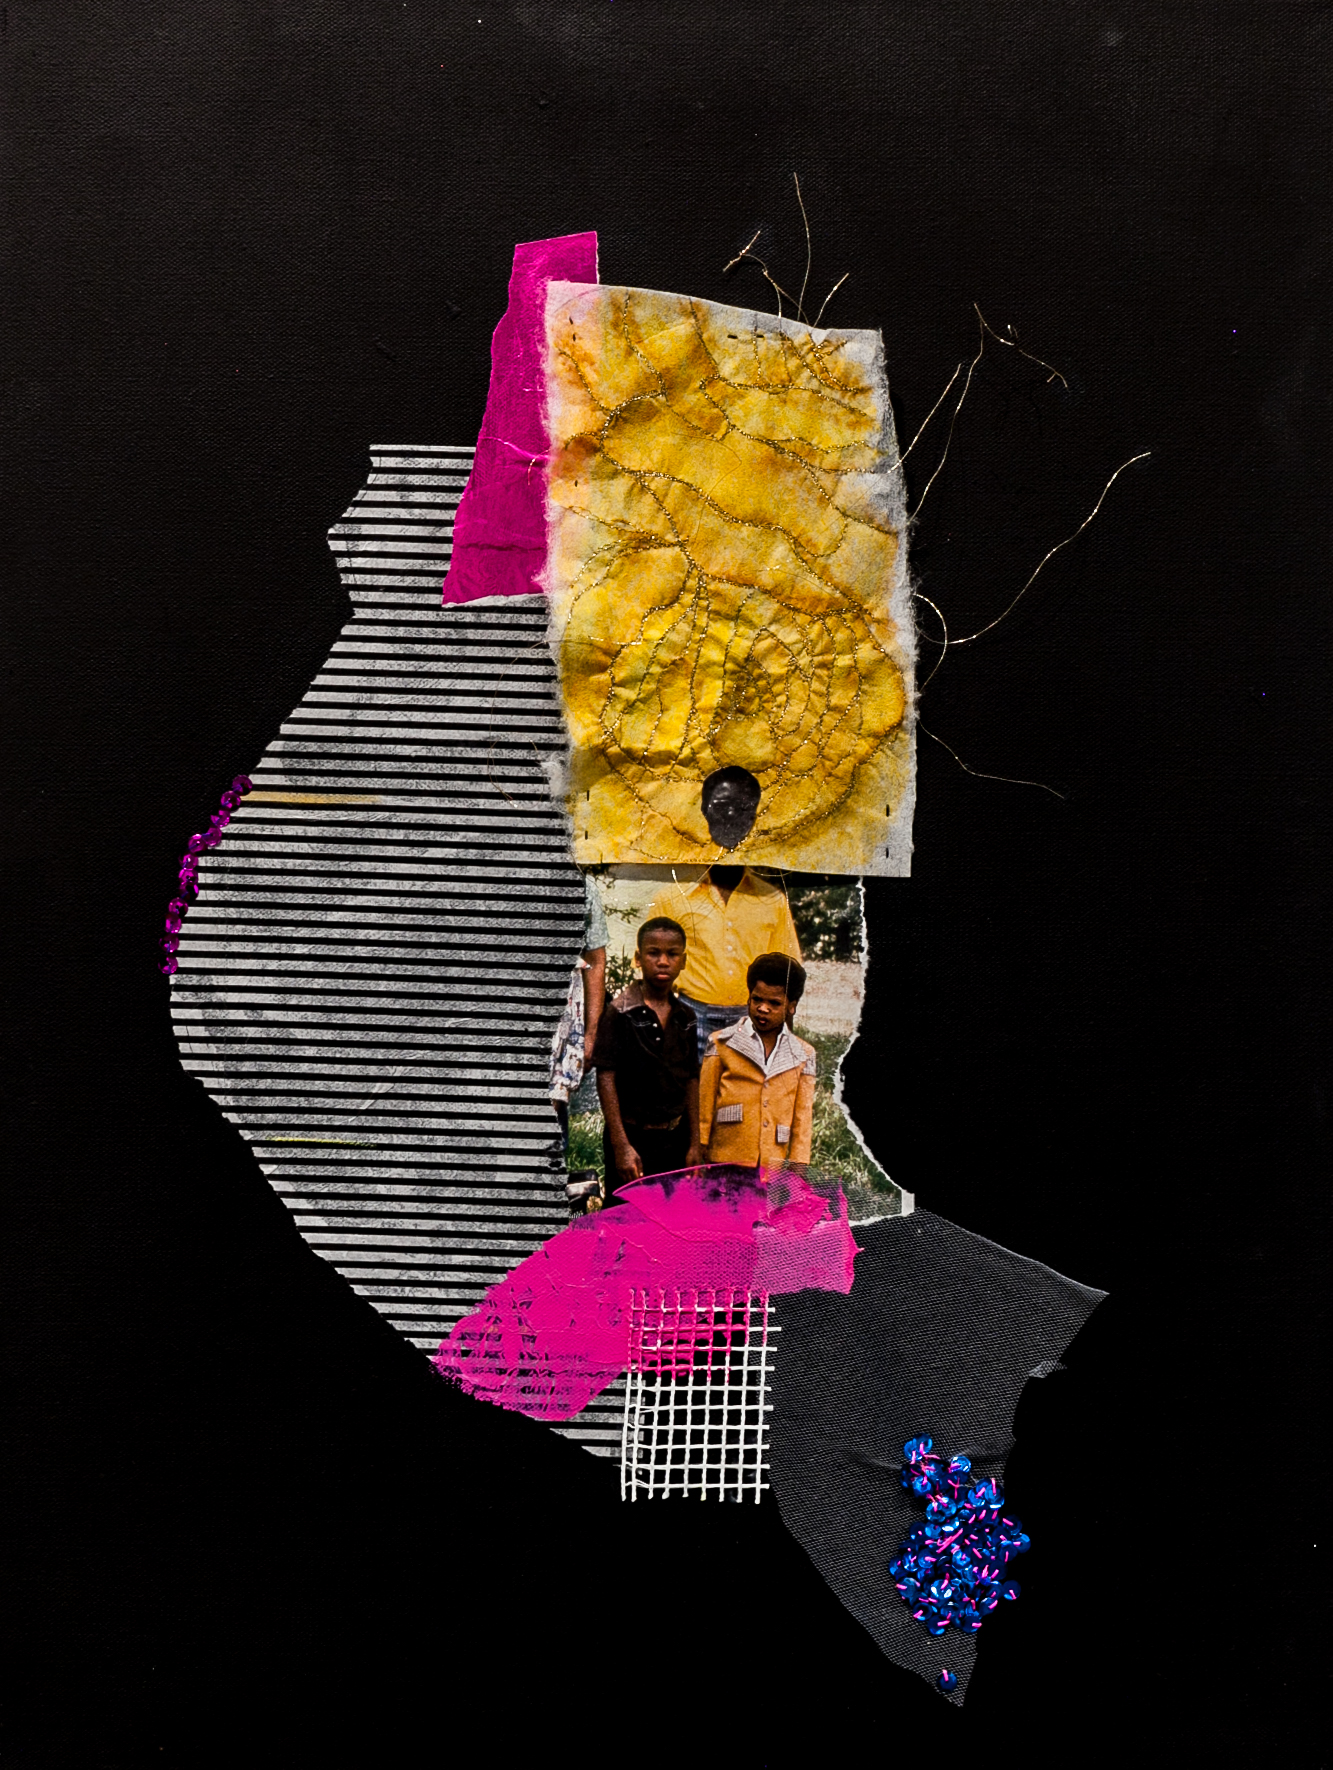  Brittney Boyd Bullock (Memphis,TN)   aren't flowers pretty, never black , 2019  Medium: Digital and mixed media  Dimensions: 18x24 inches; 11x17inches  “[These are from] a series of works that explore the underlying effects of mass media and the per